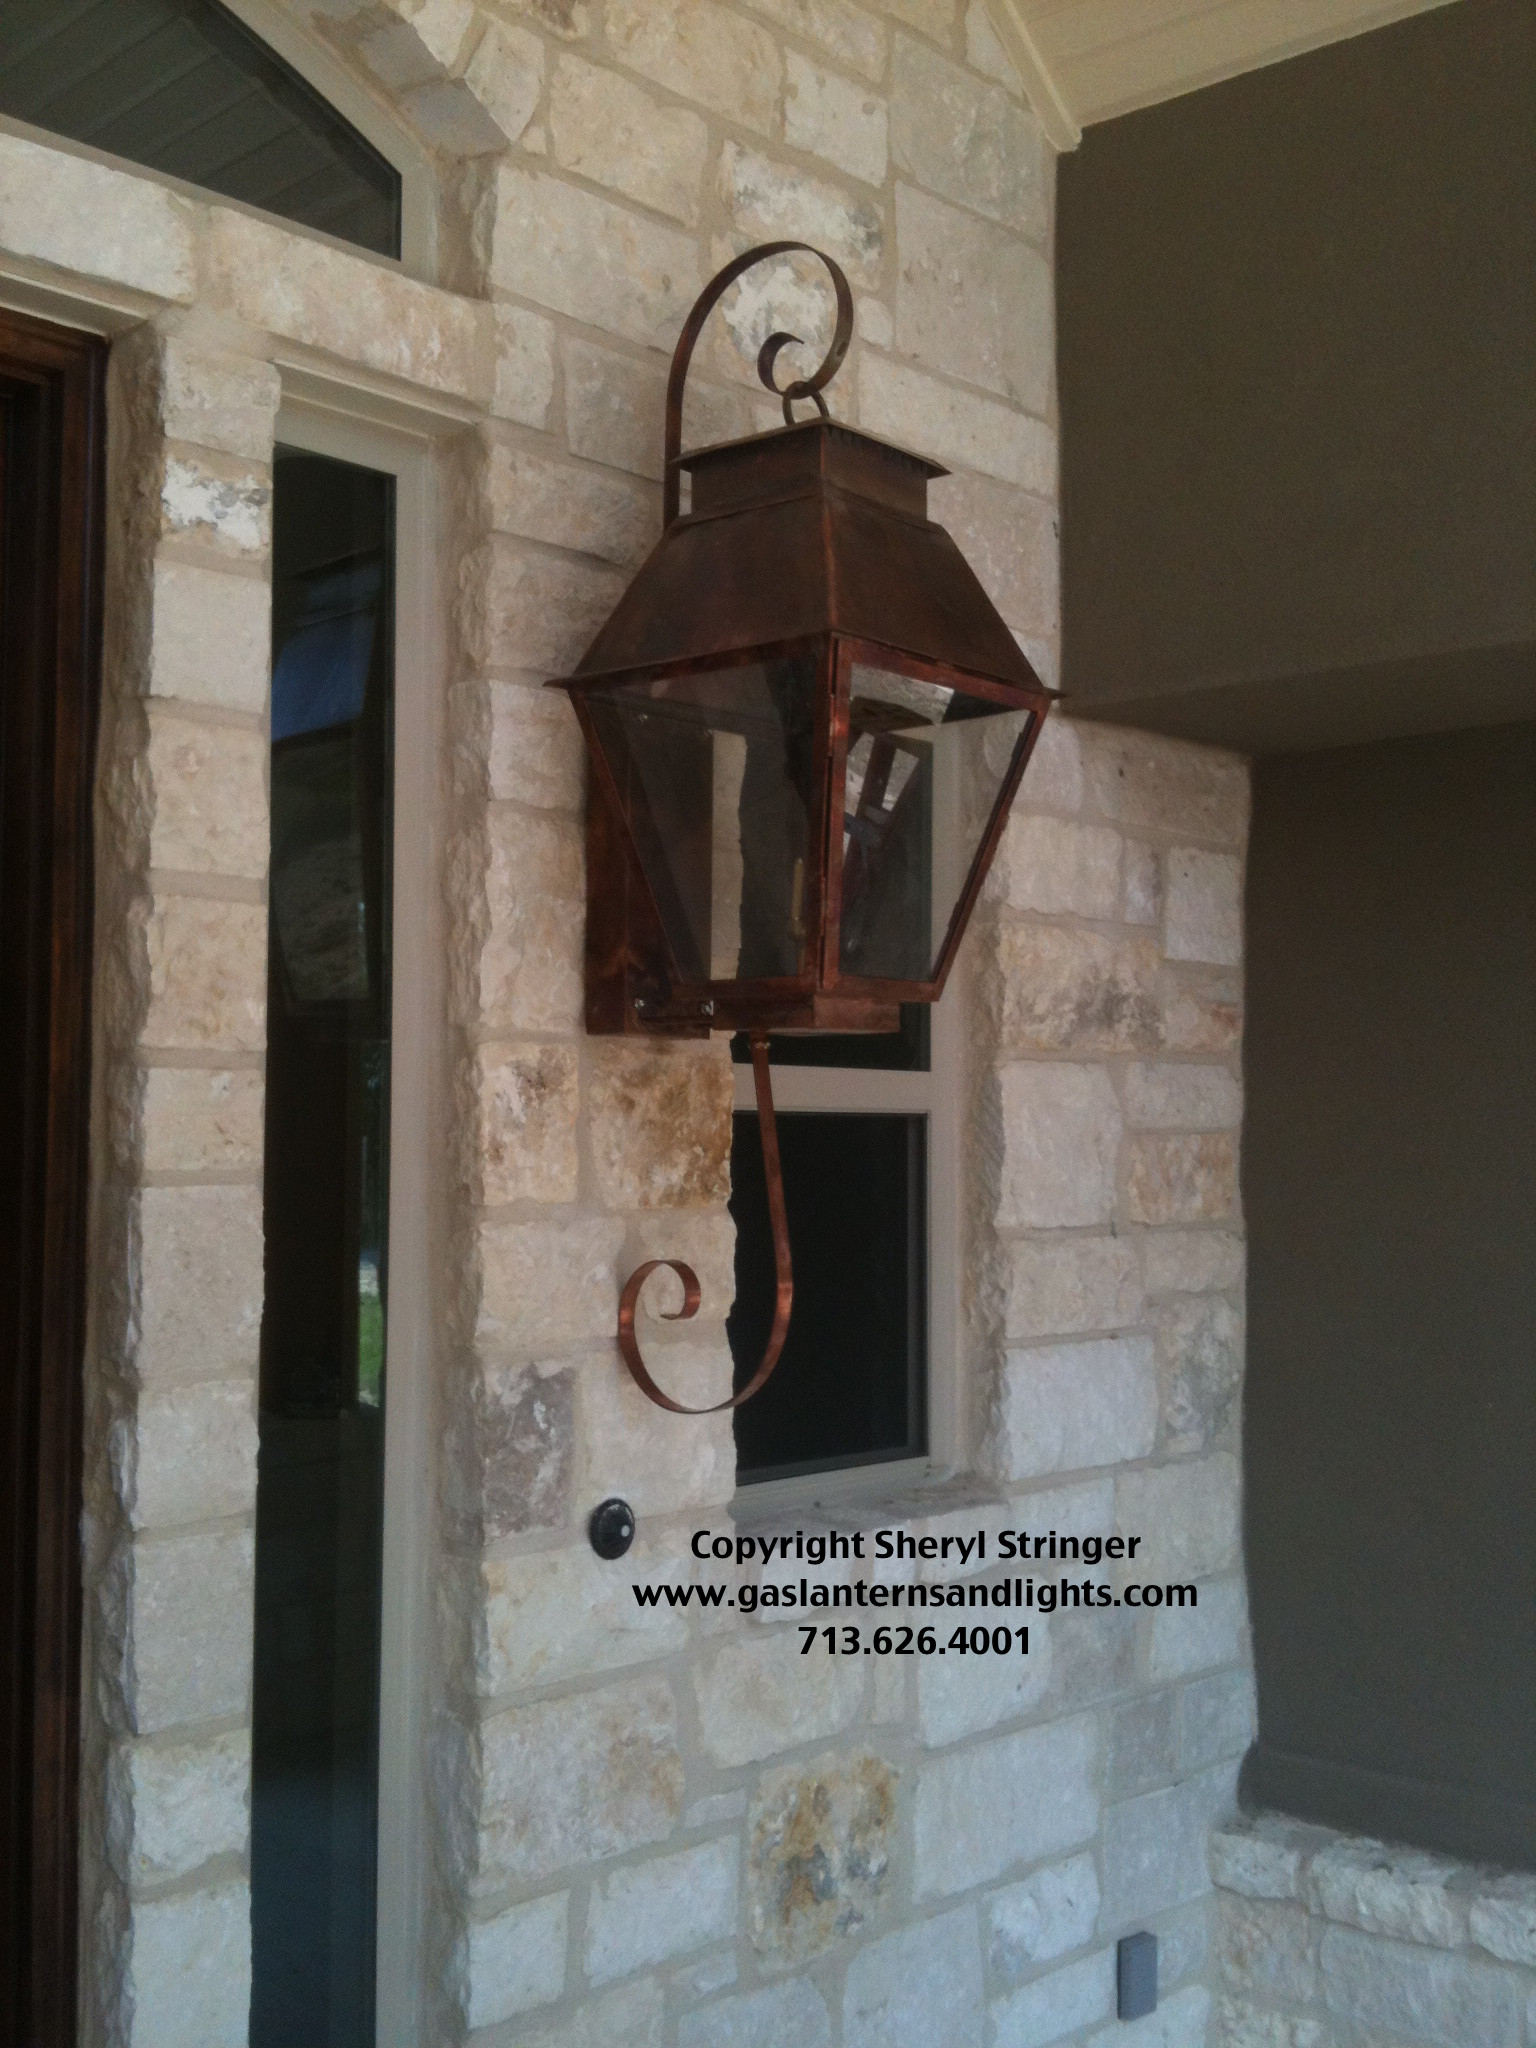 Hill Country Style Home with Gas Lanterns